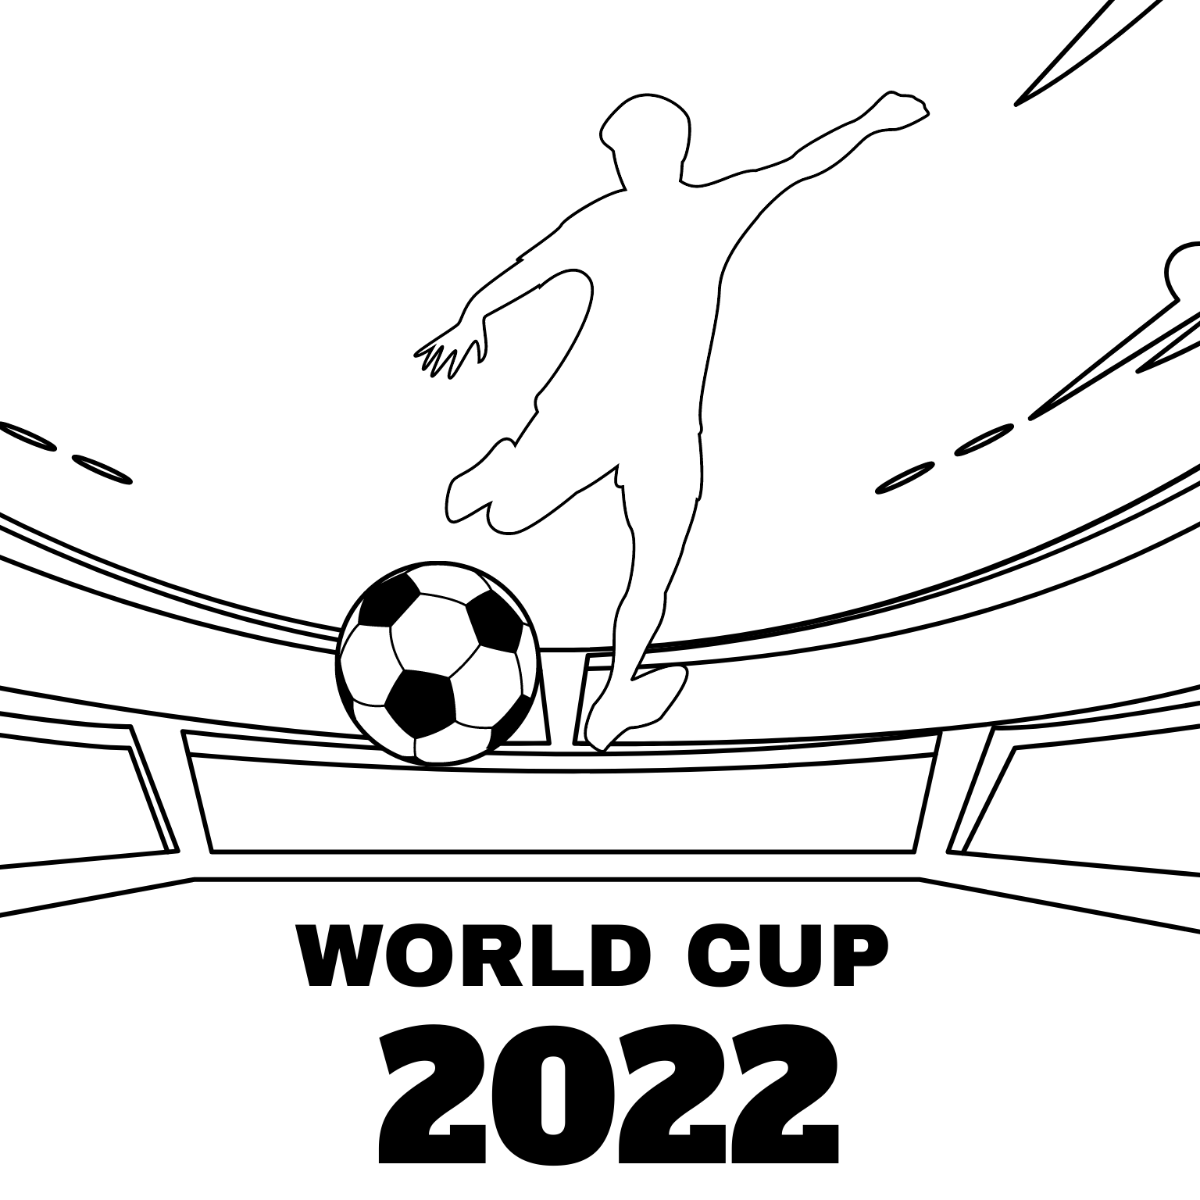 World Cup 2022 Sketch Vector Template